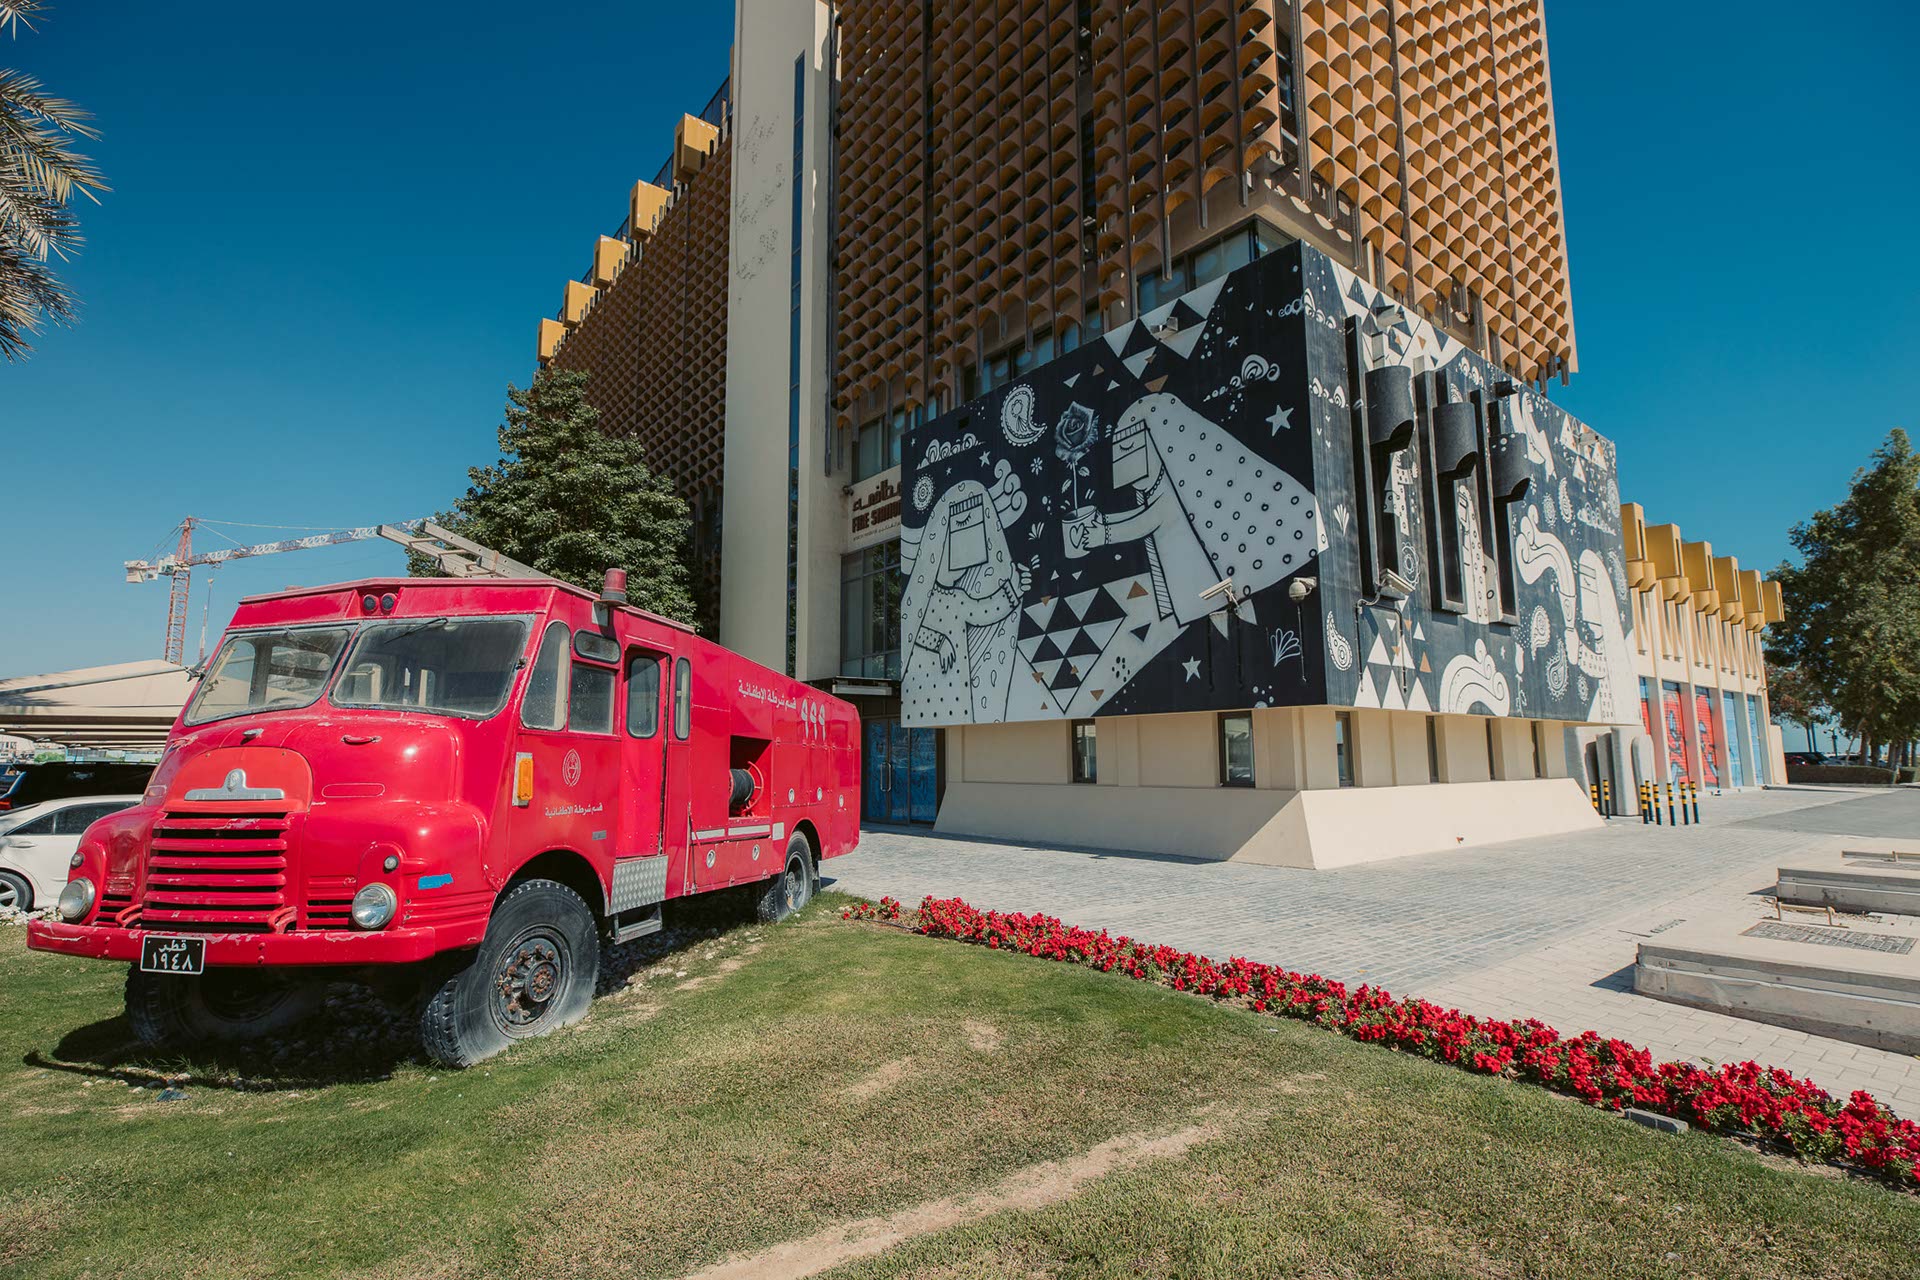 A decommissioned fire truck sits on grass in front of a multi-storey building with a modern facade. This is Fire Station, a contemporary art space. A cartoon-style mural of veiled women with flowers, bells and more wraps around the corner of the building closest to the fire truck. A walkway separates the truck and the building. A construction crane is visible in the background. It is daytime.